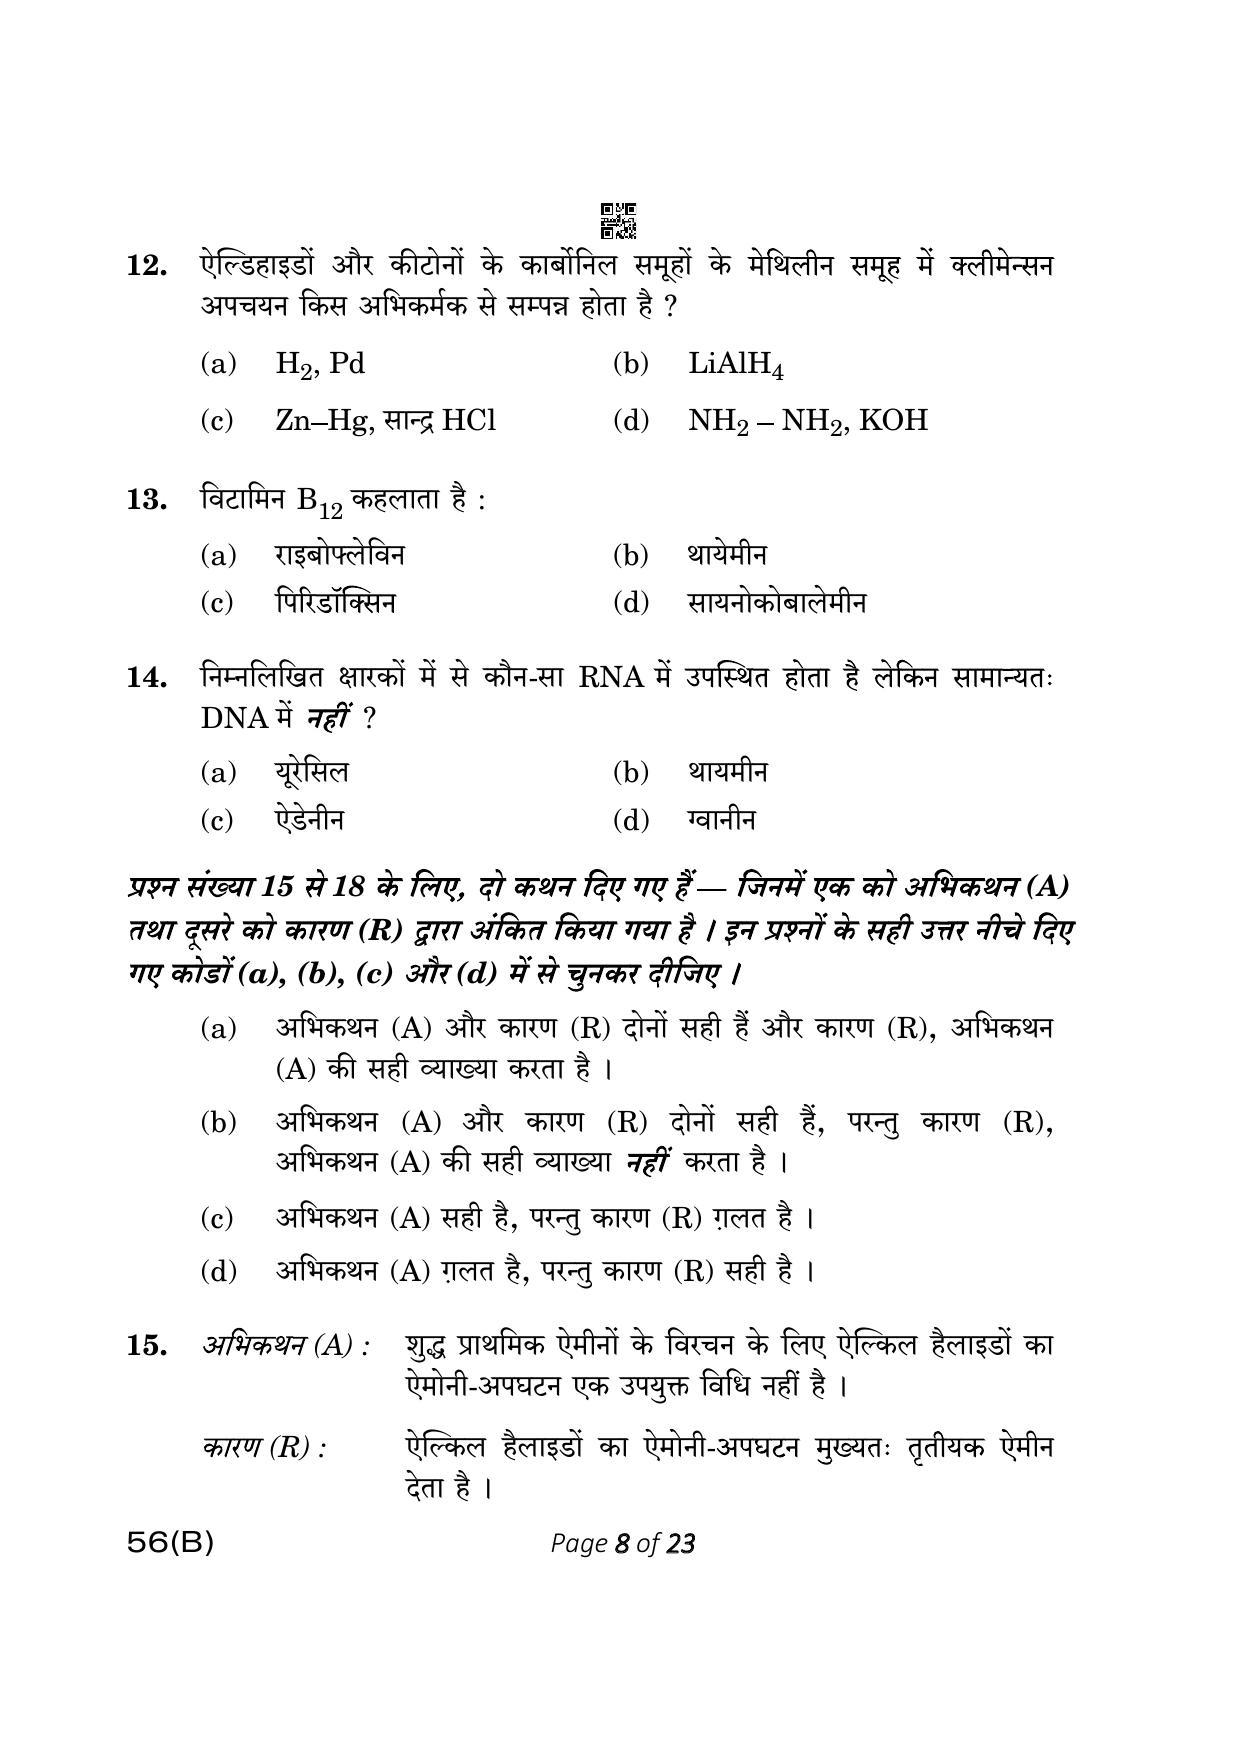 CBSE Class 12 56-B Chemistry 2023 (Compartment) Question Paper - Page 8